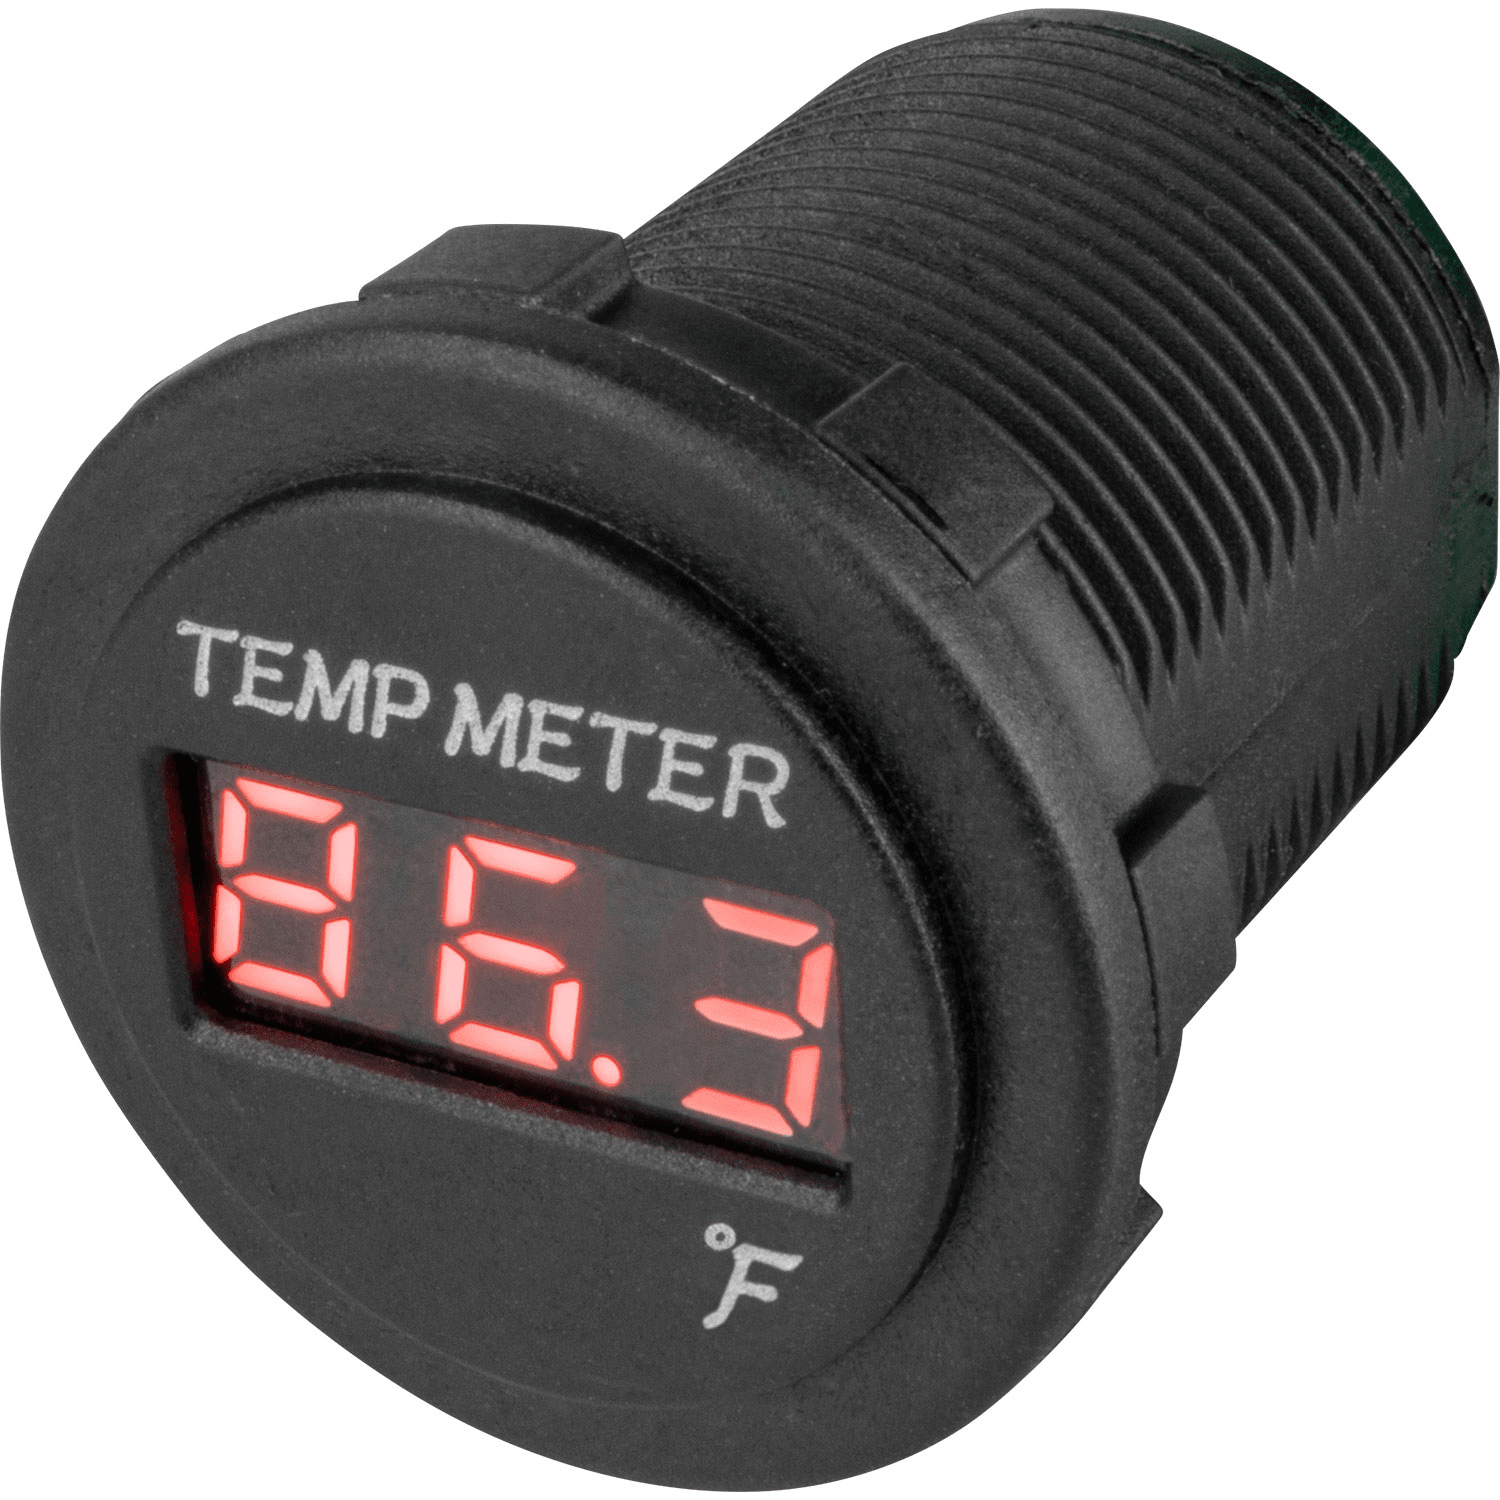 421618 of Sea-Dog Line Round Red LED Temperature Meters